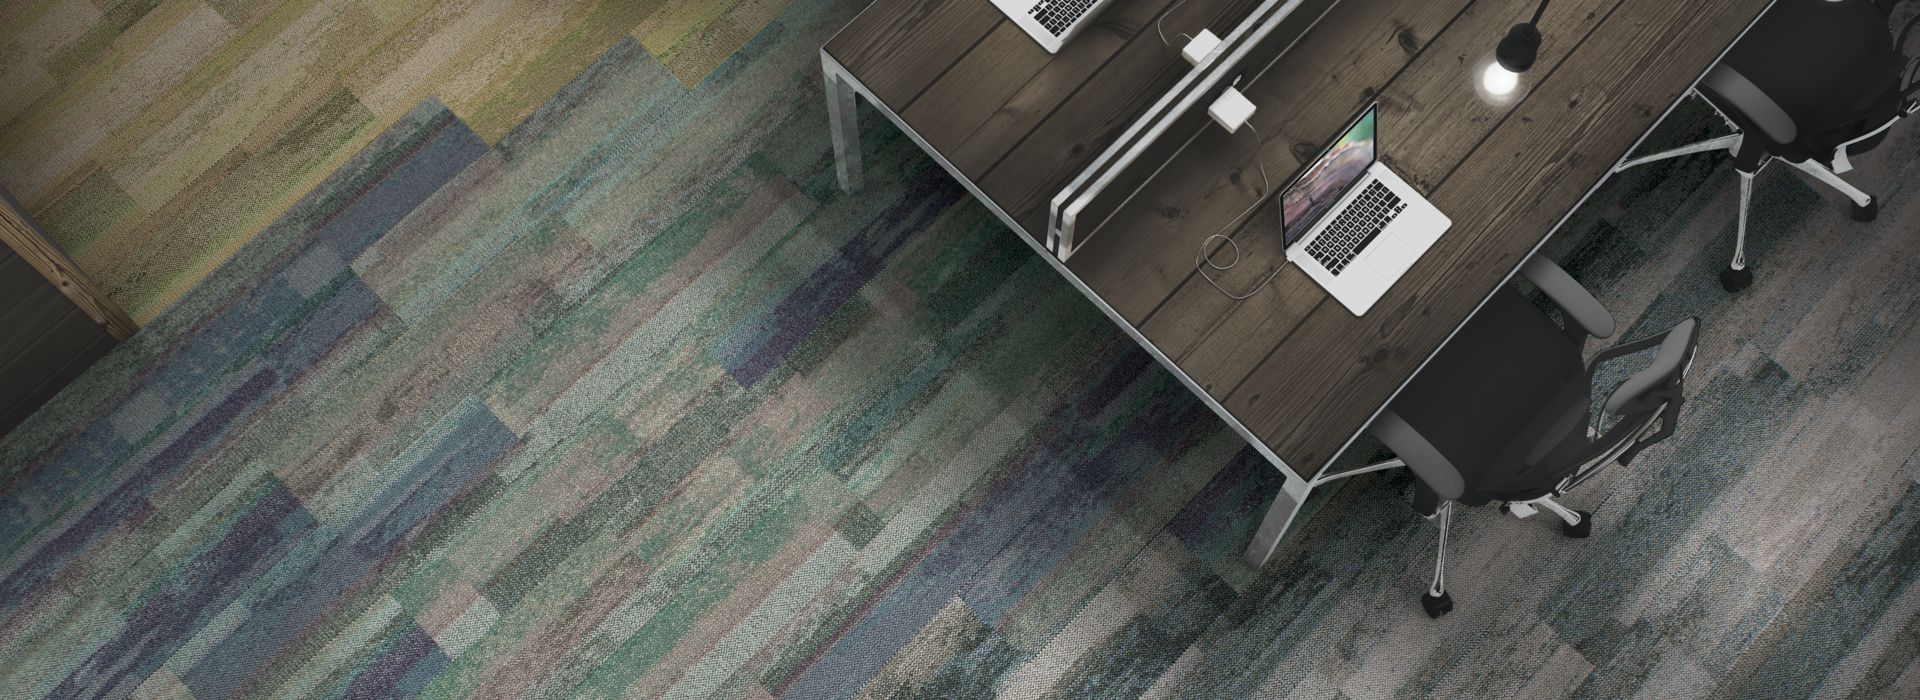 Interface Reclaim plank carpet tile in overhead view of office area